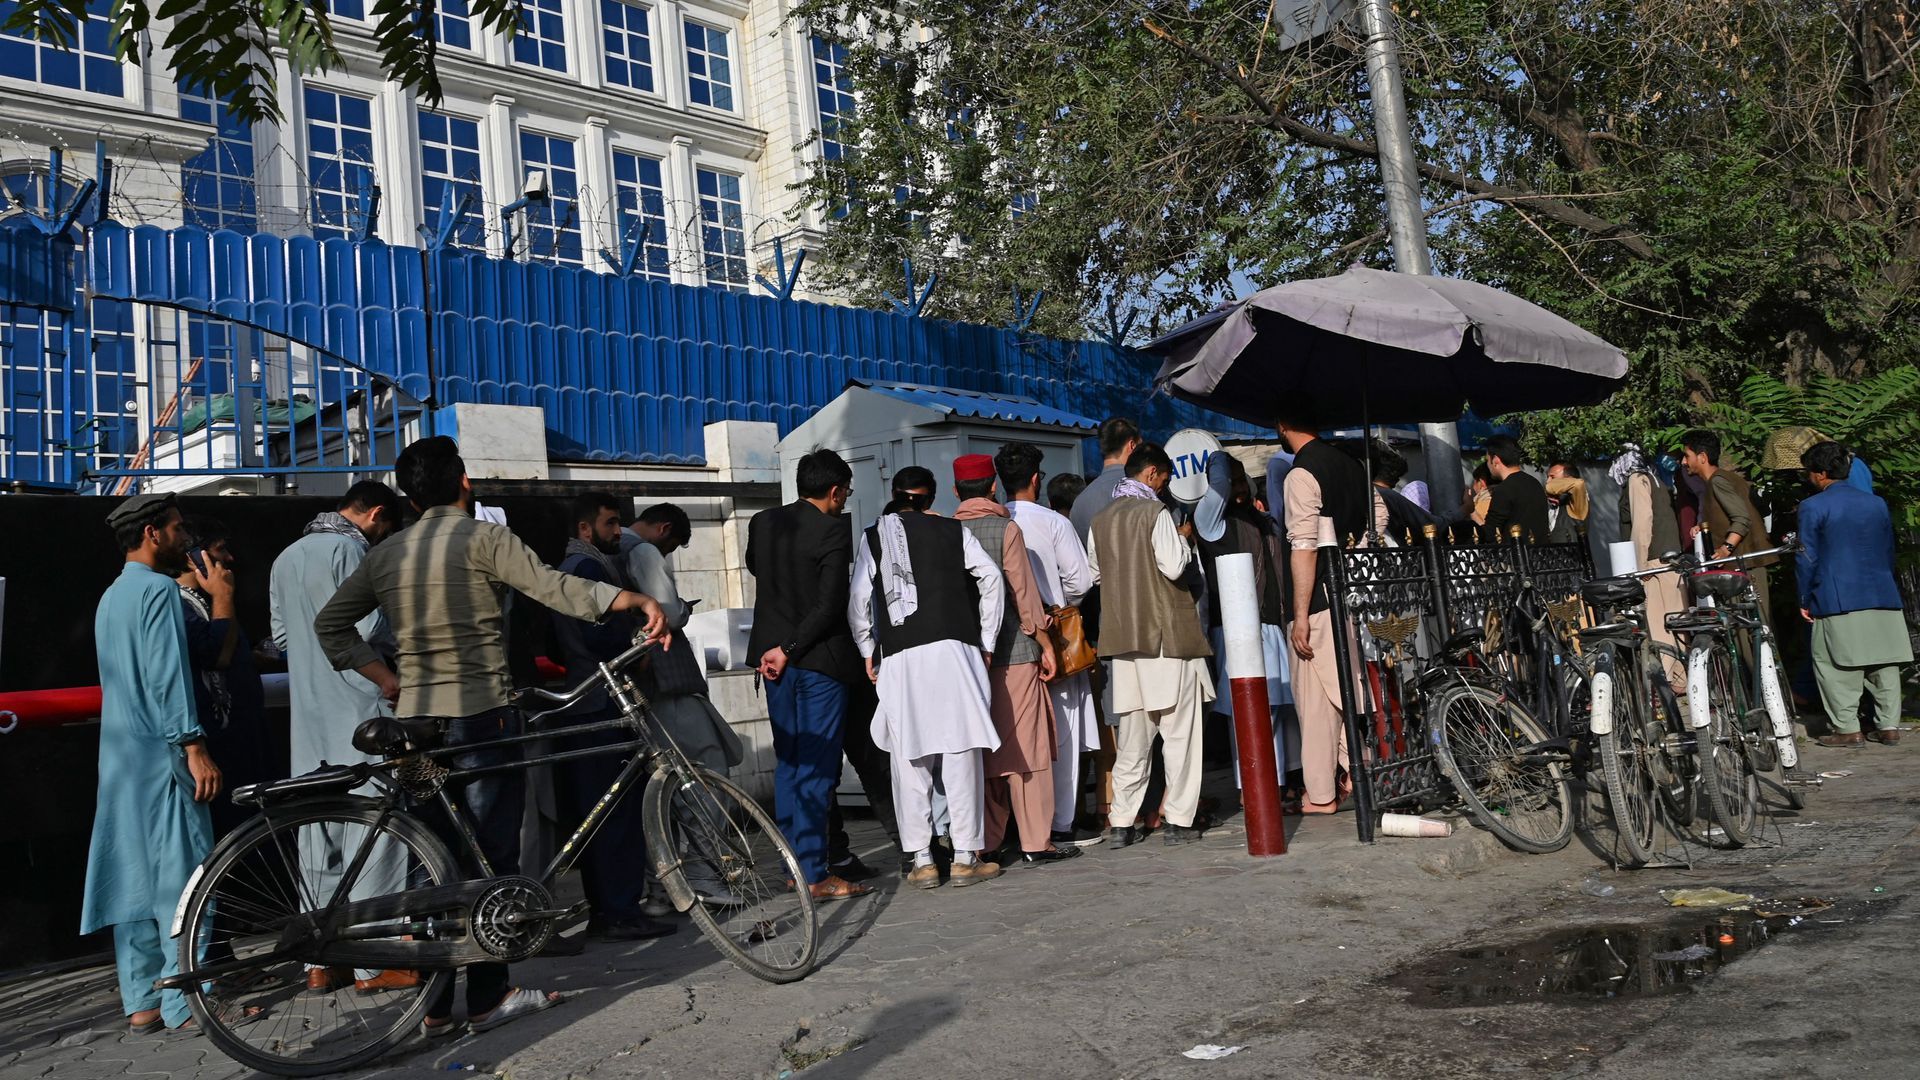 A crowd of Afghans lined up waiting their turn at an ATM outside a building